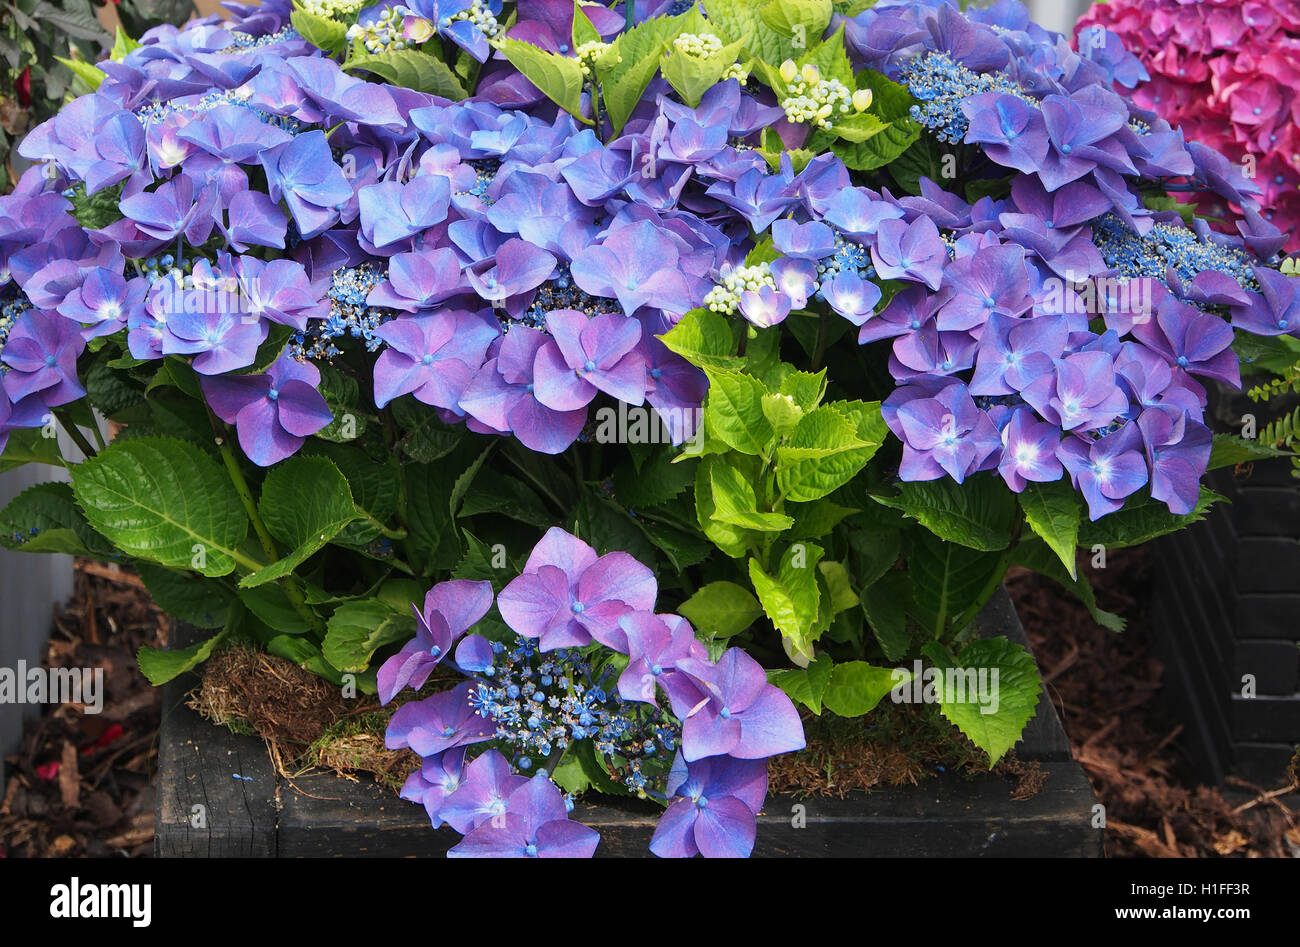 Blue Hydrangea Kardinal Violet, in full bloom in July 2016 at Tatton Park Flower show in Cheshire, England, UK. Stock Photo